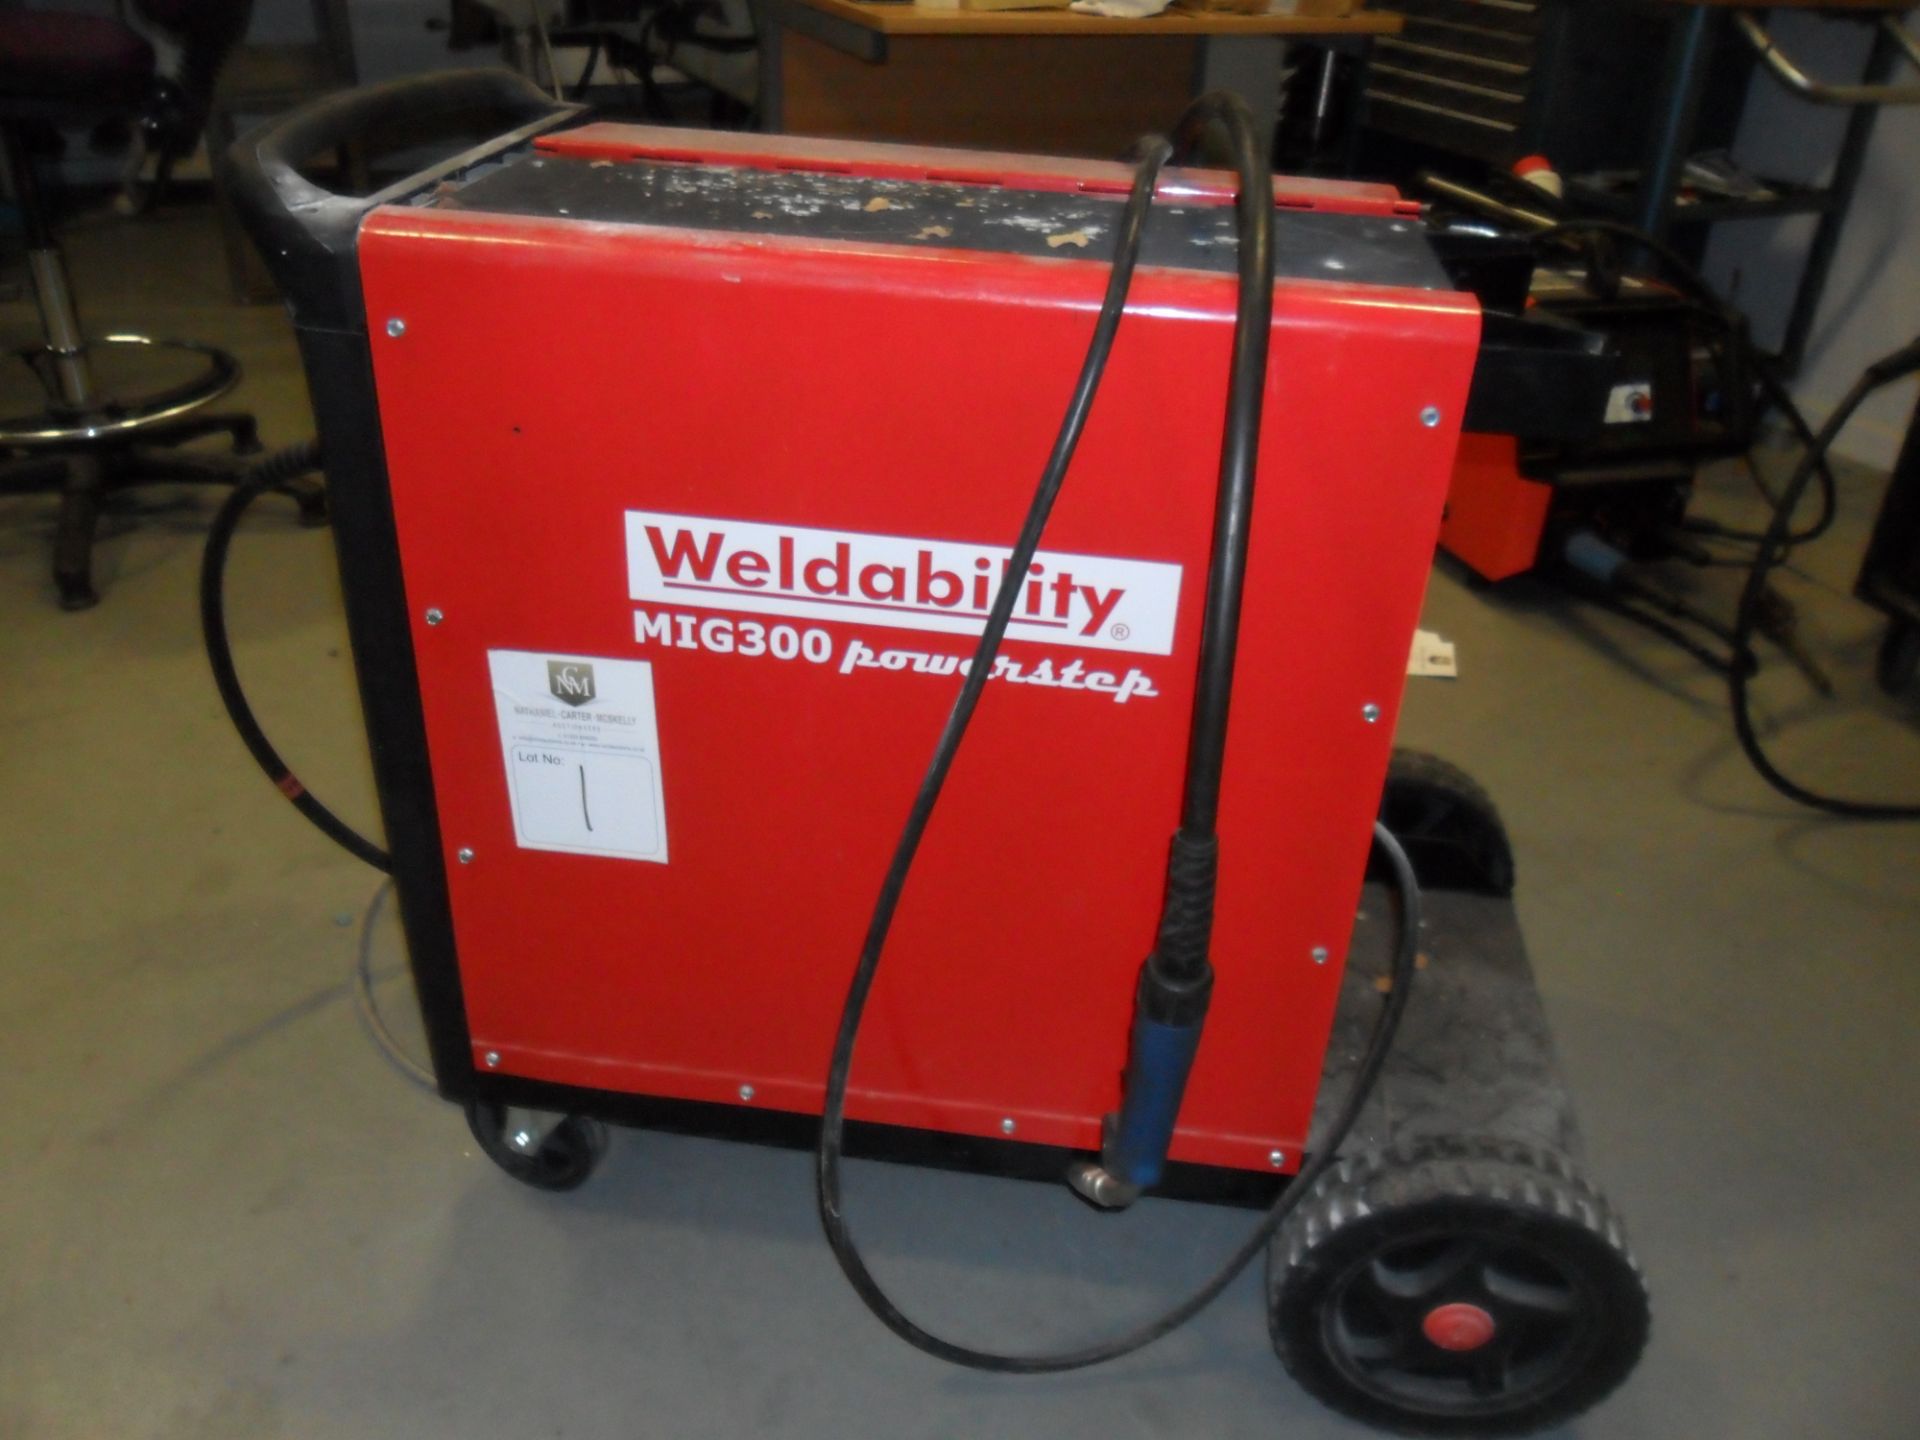 Weldability Mig 300 Powerstep Welder includes leads and welding torch if shown in photo. - Image 2 of 2